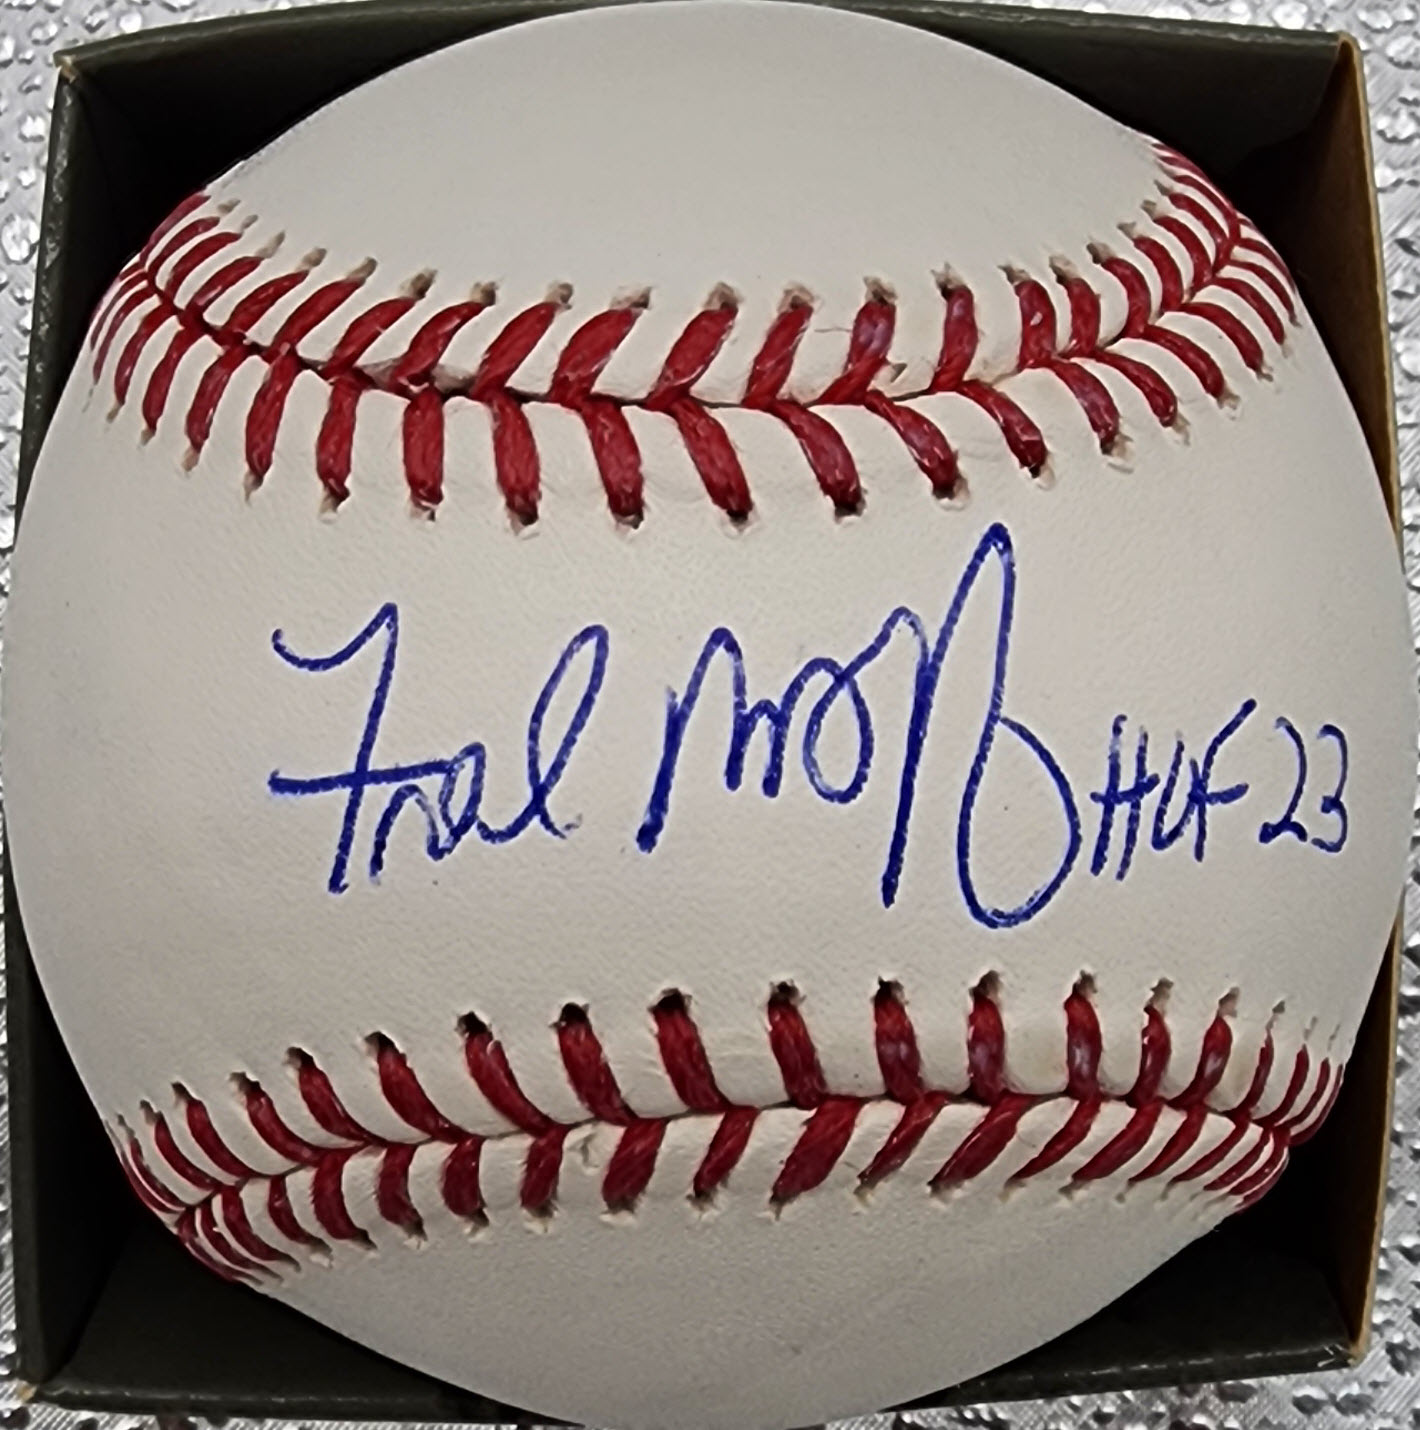 Fred McGriff Autographed OMLB Baseball with HOF23 inscription on sweetspot